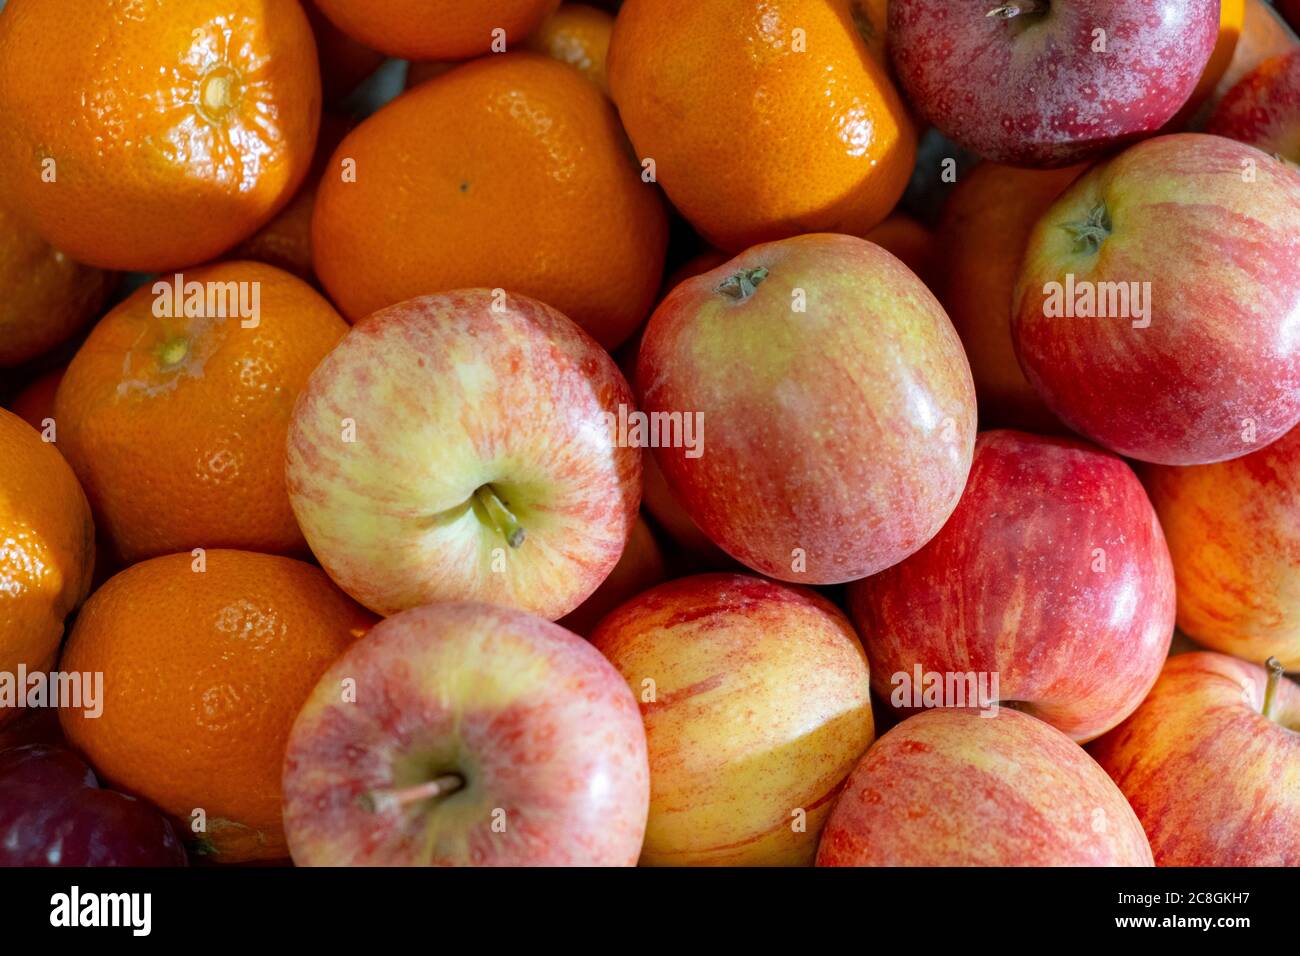 Healthy eating options. Stock Photo